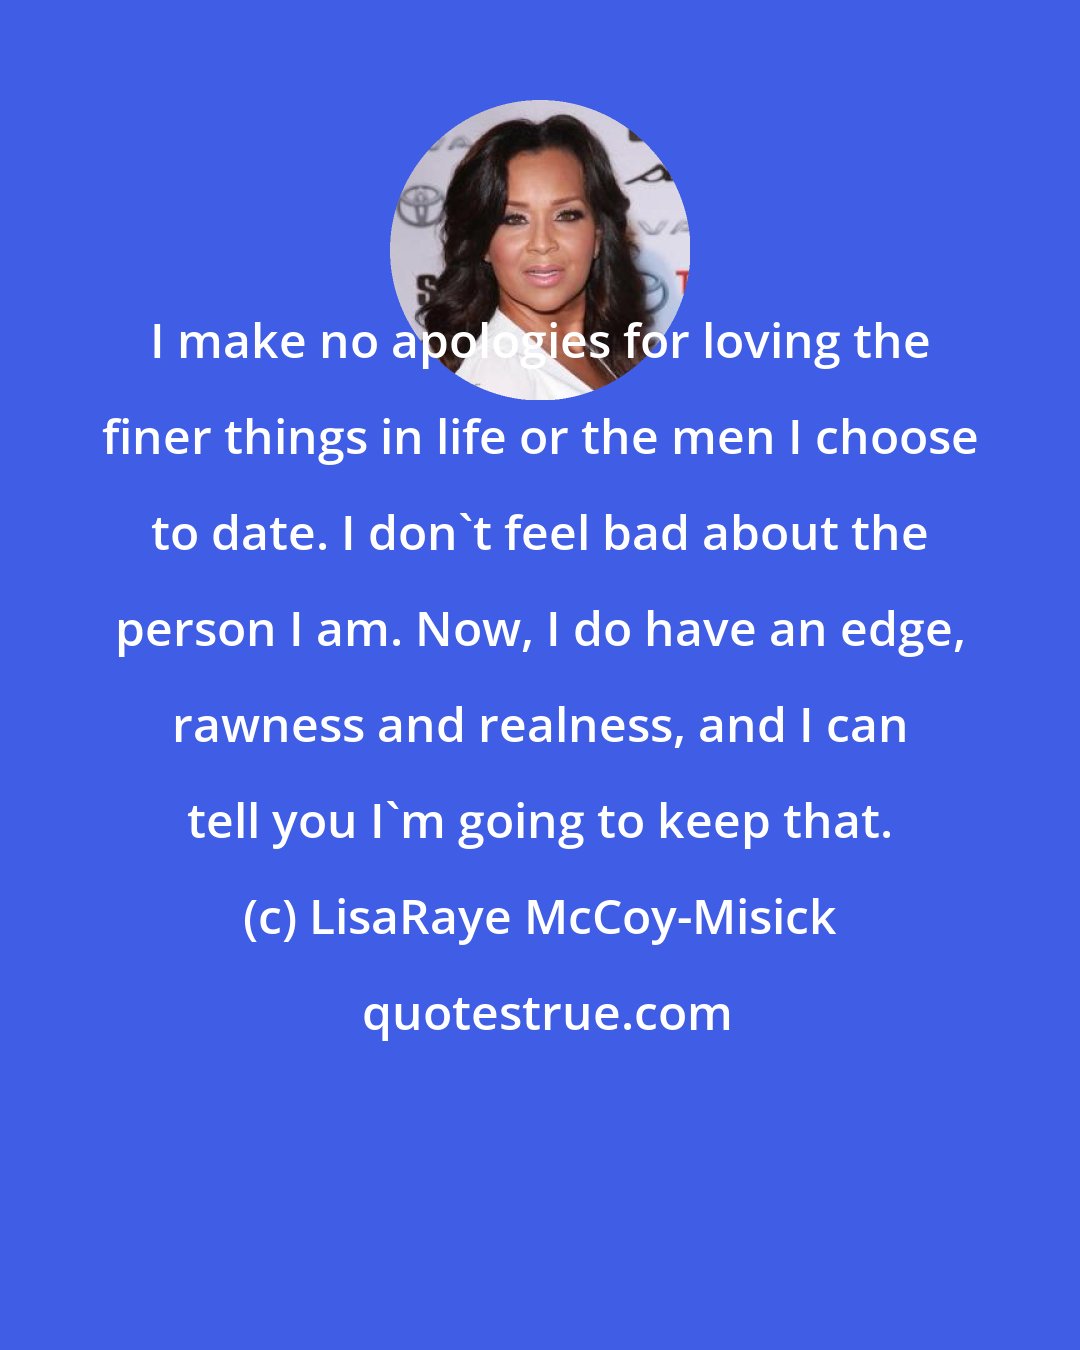 LisaRaye McCoy-Misick: I make no apologies for loving the finer things in life or the men I choose to date. I don't feel bad about the person I am. Now, I do have an edge, rawness and realness, and I can tell you I'm going to keep that.